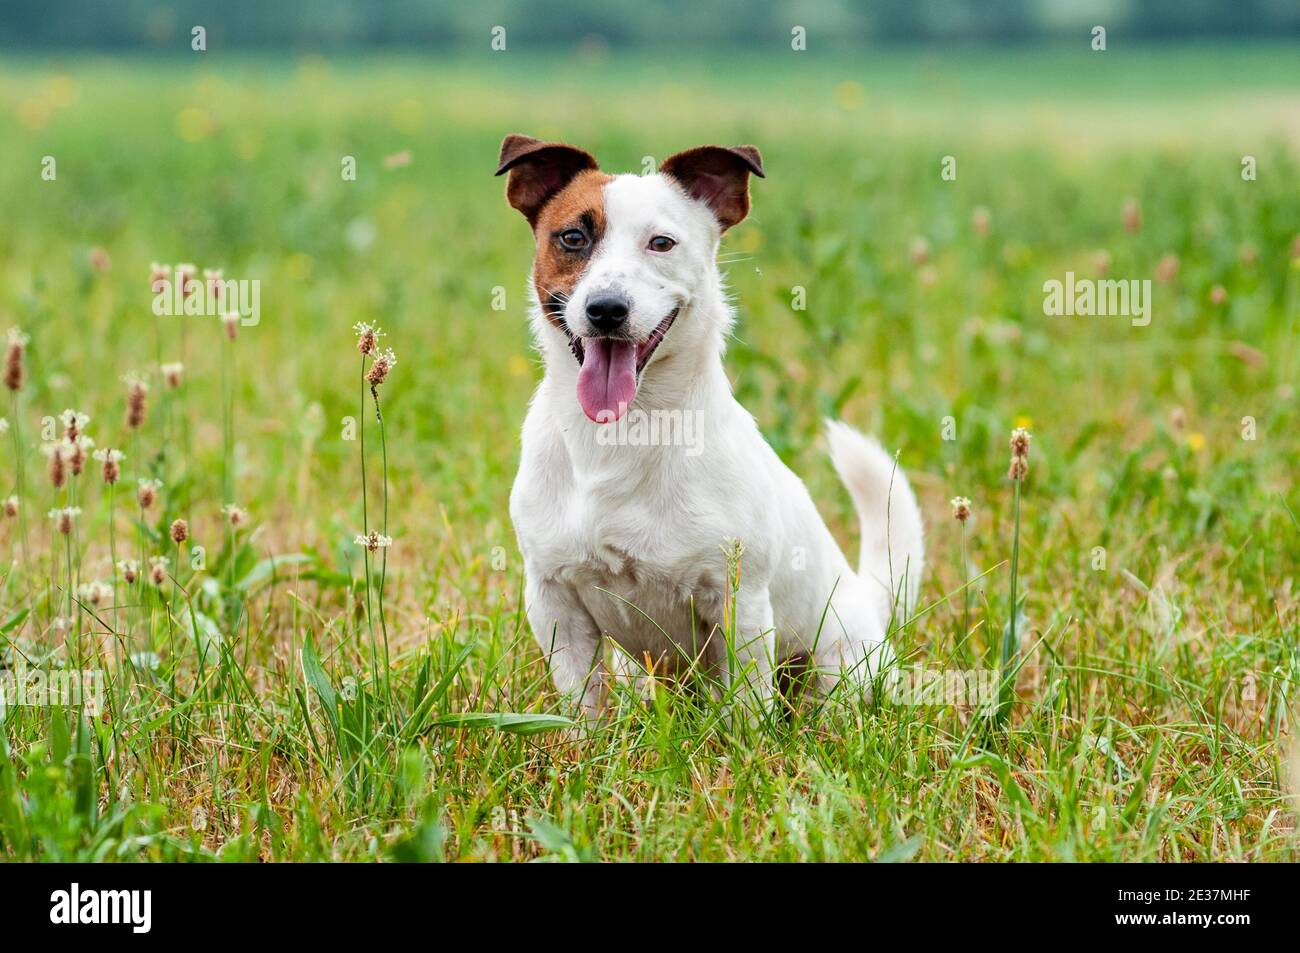 Jack Russell Terrier is sitting in the grass. Natural environment, tongue out Stock Photo